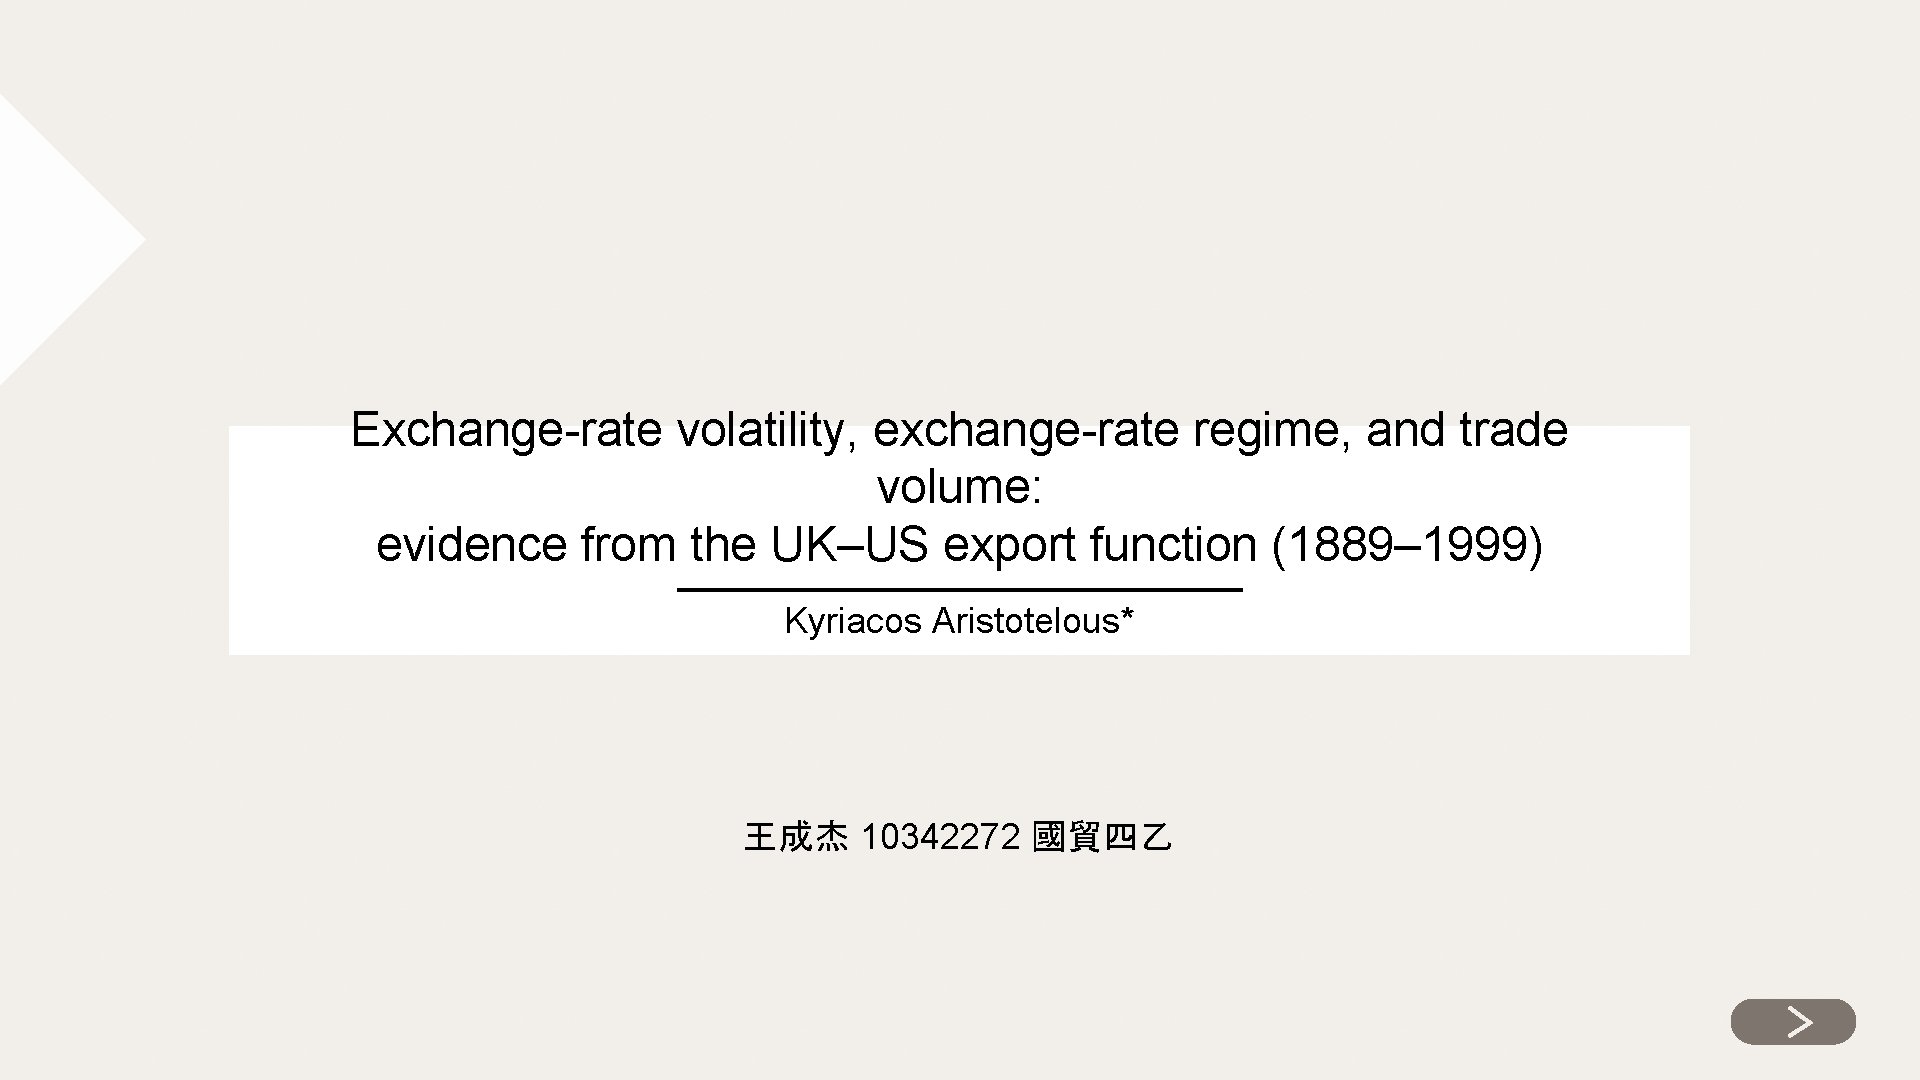 Exchange-rate volatility, exchange-rate regime, and trade volume: evidence from the UK–US export function (1889–